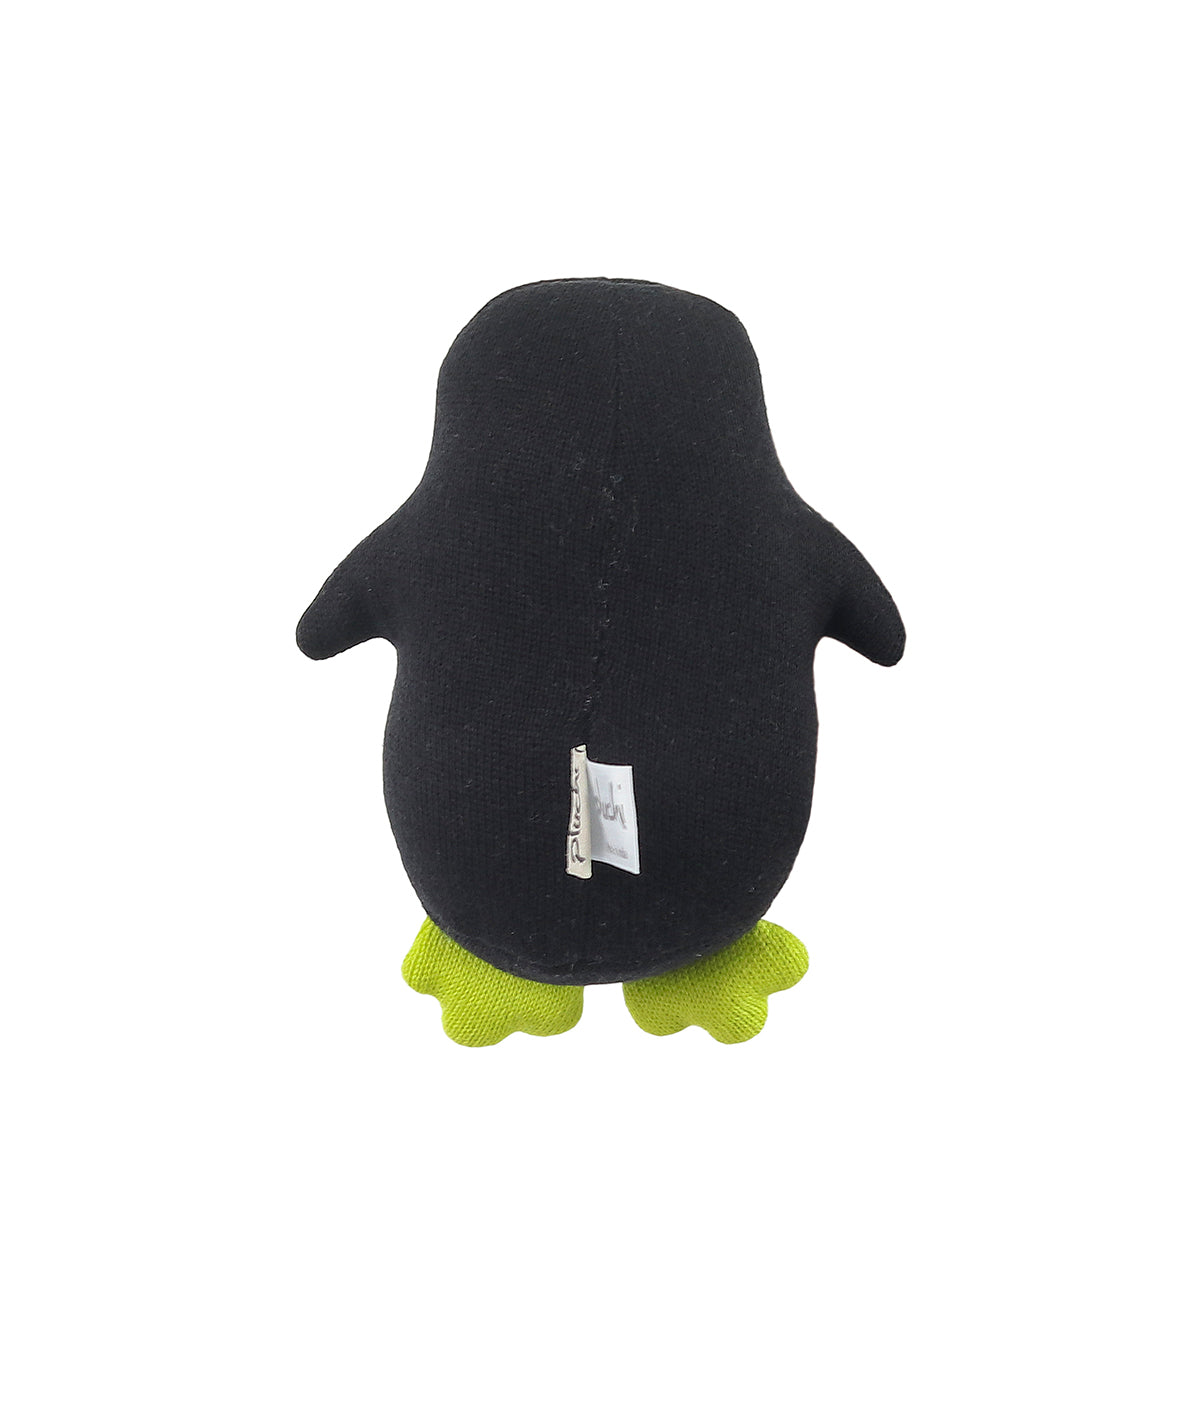 Snowy Penguin Cotton Knitted Stuffed Soft Toy (Black, Ivory & Neon)